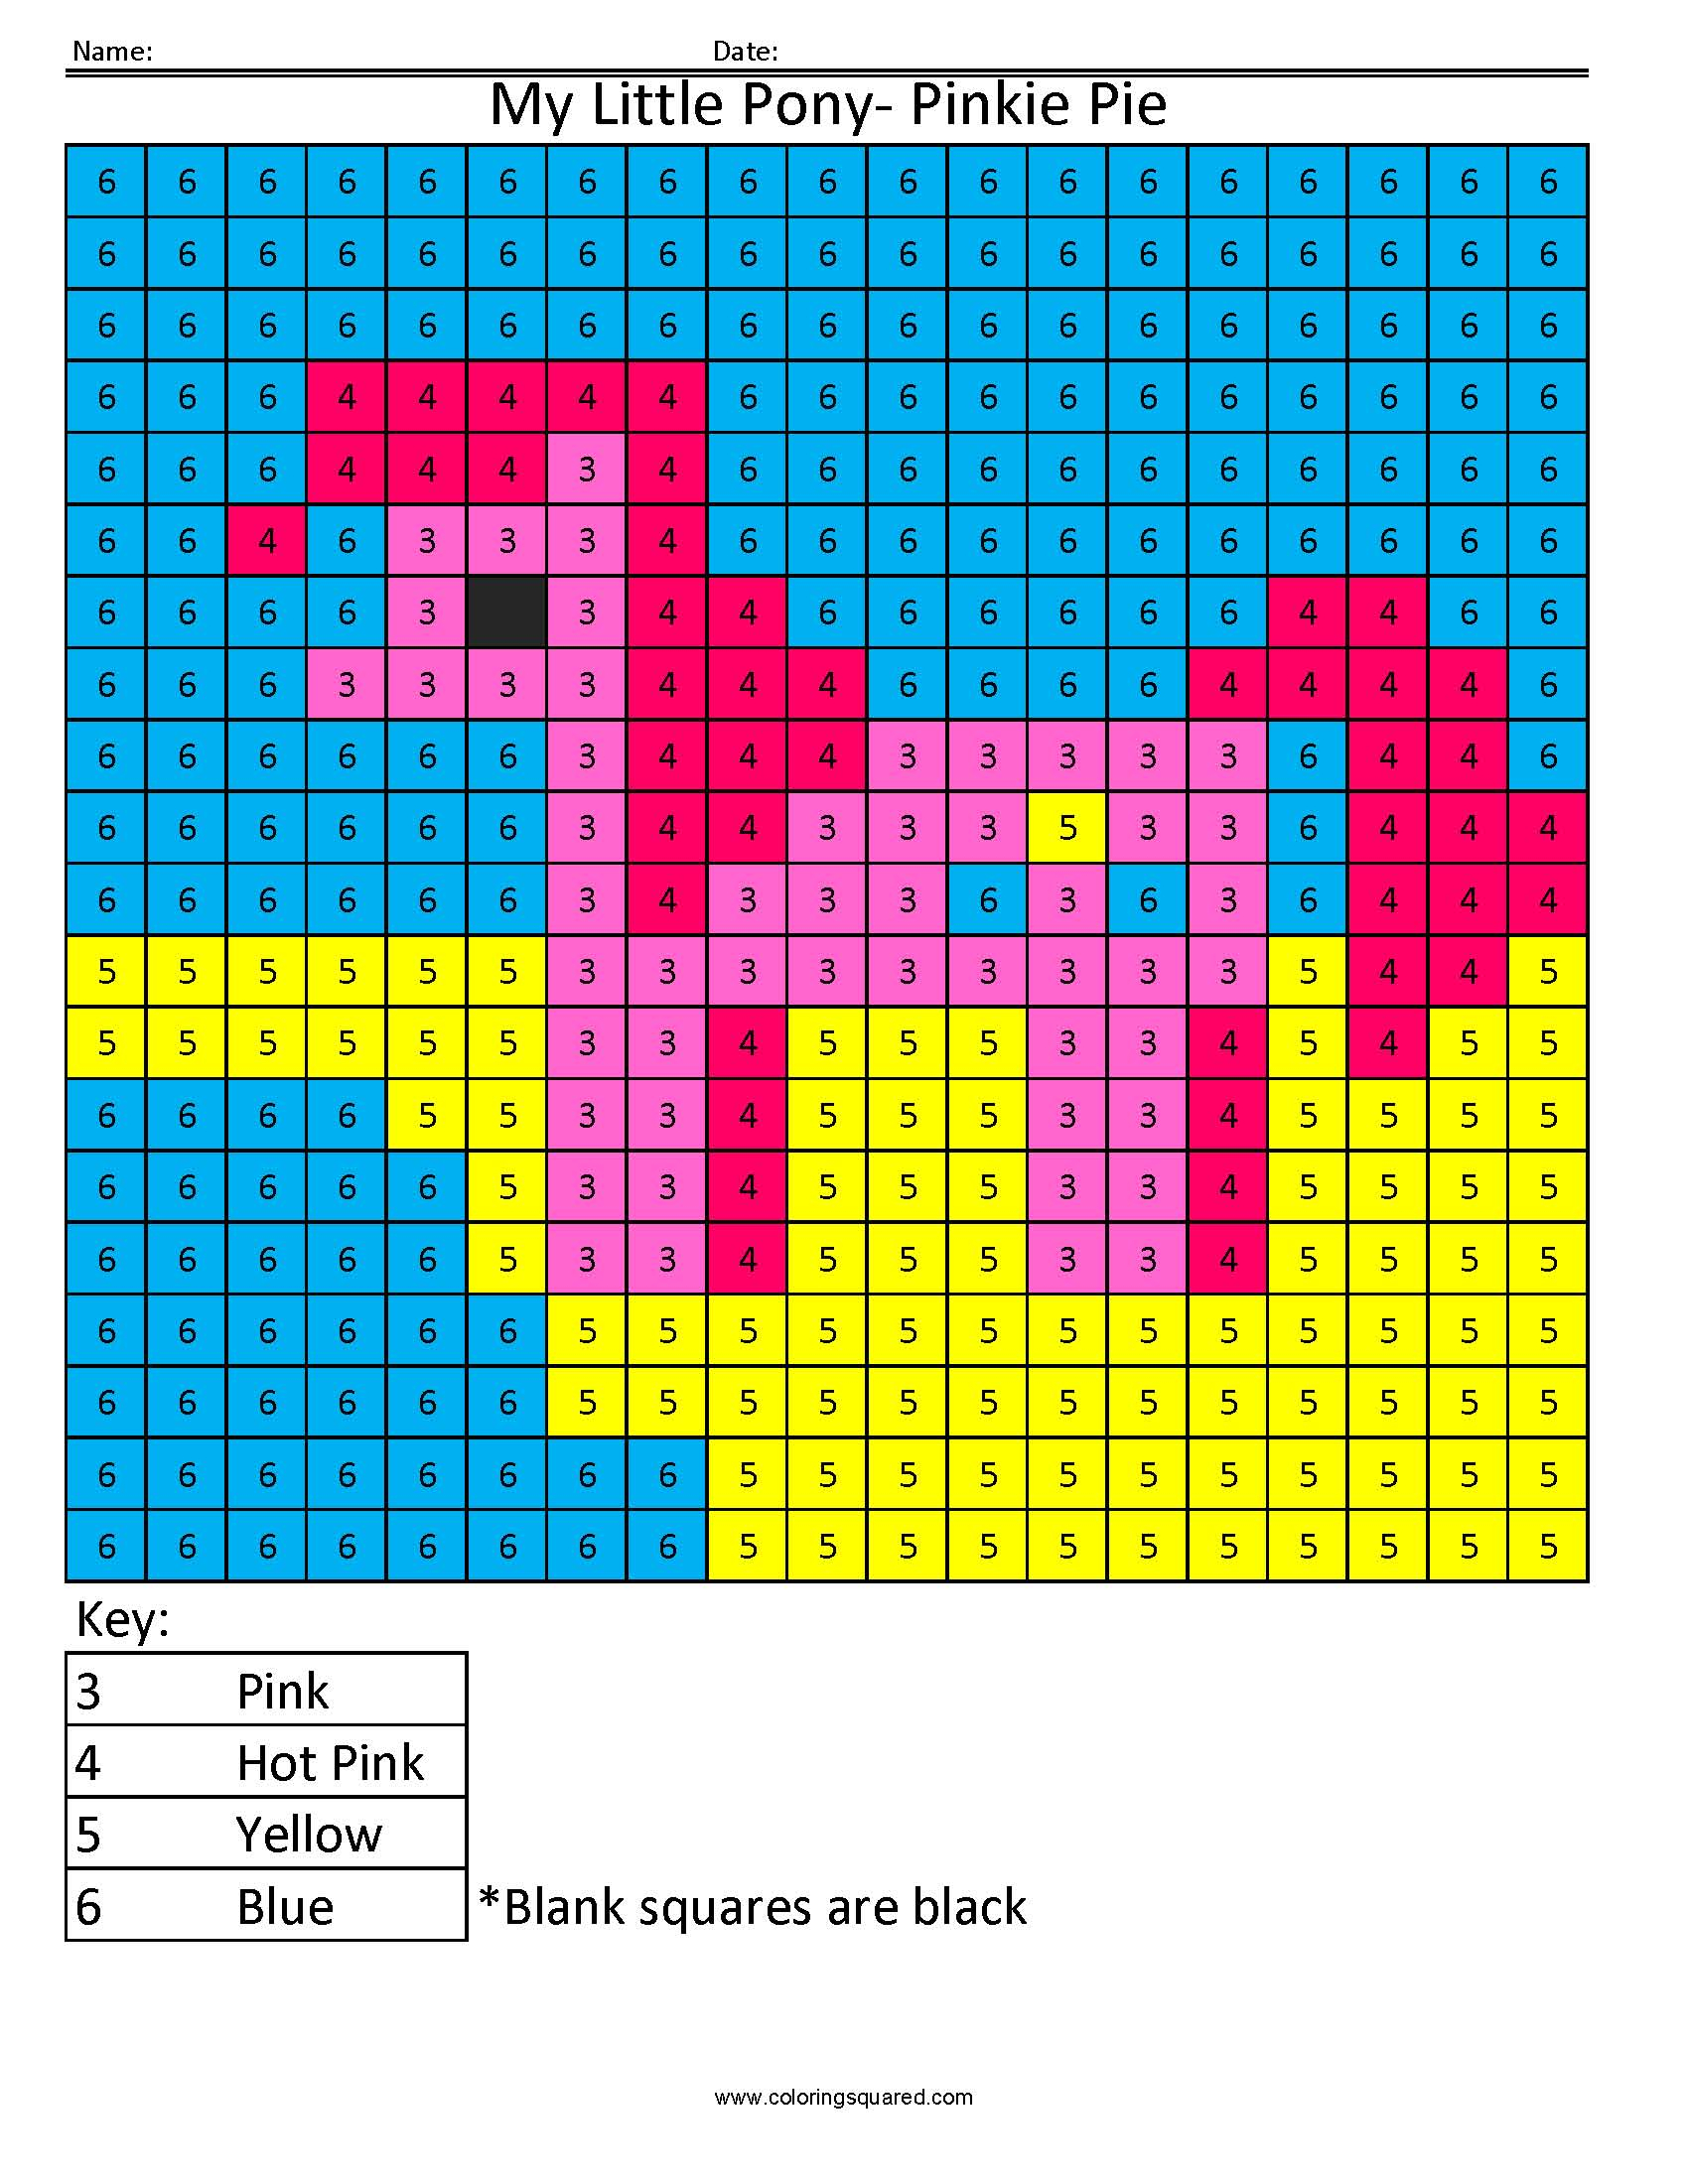 My Little Pony Color By Number Coloring Squared